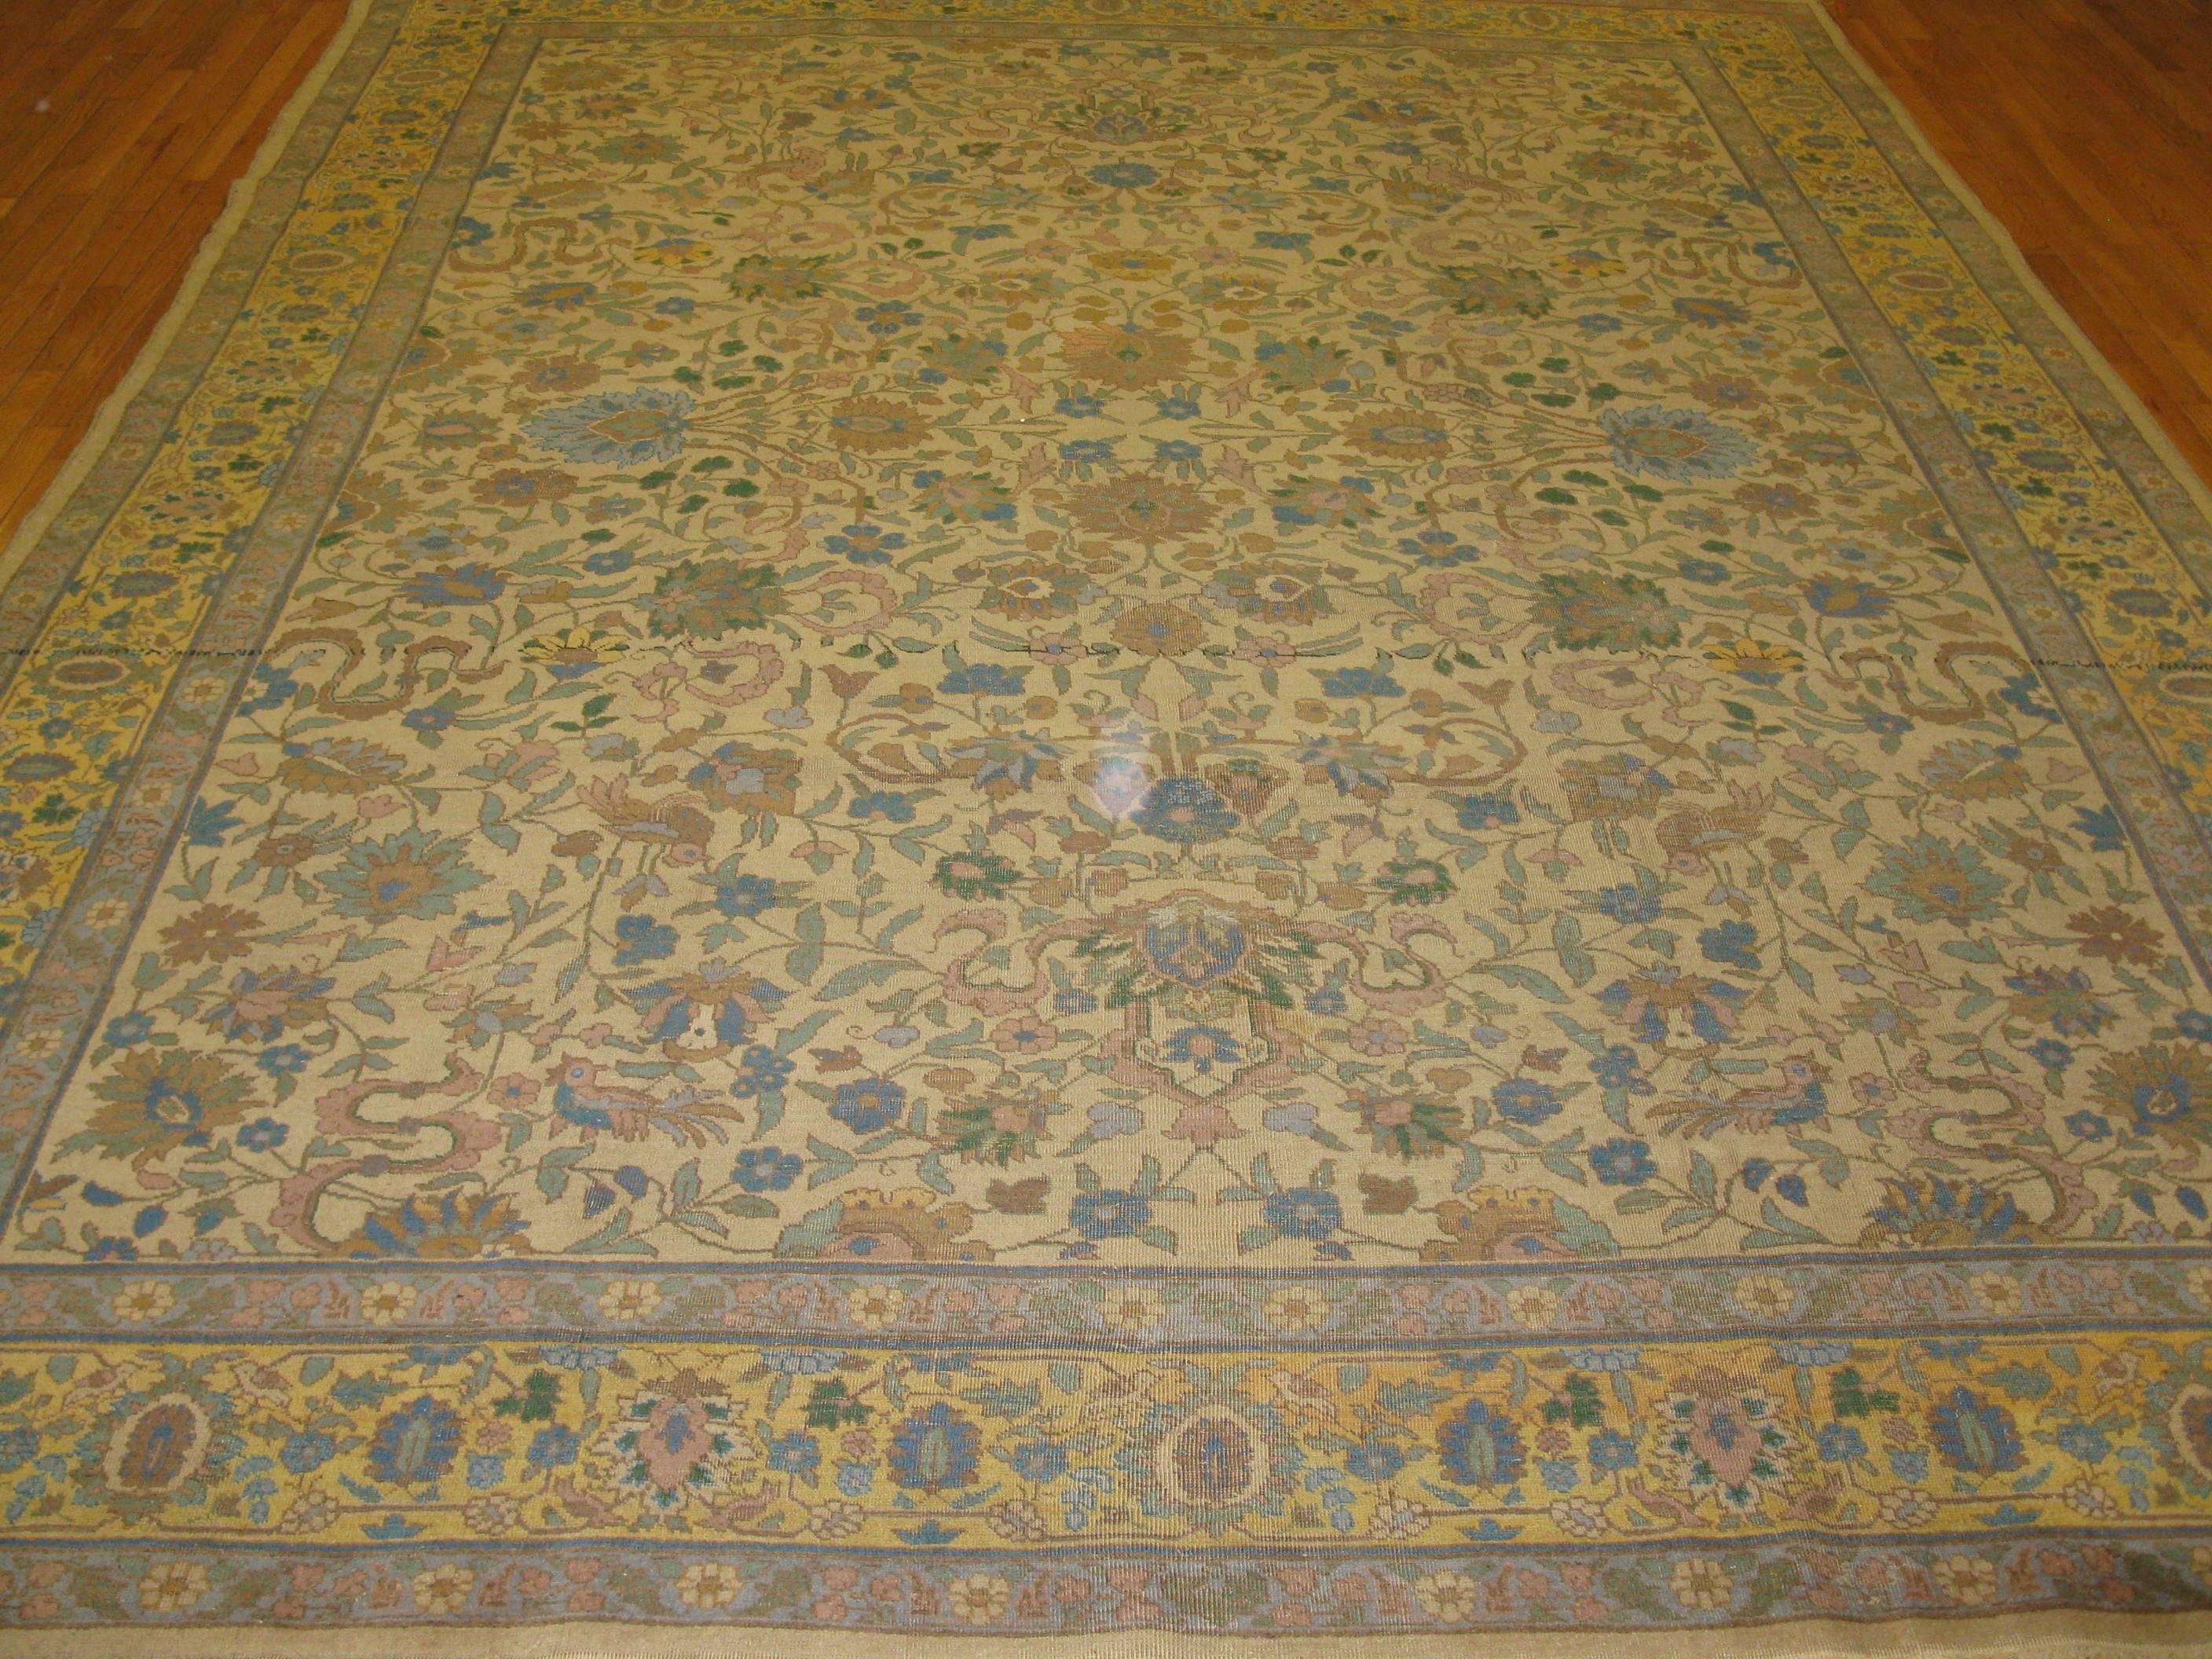 This is a beautiful antique hand-knotted Indian Agra rug. It has an elegant all-over detailed floral pattern on an ivory background and gold border. The rug measures 9' 2